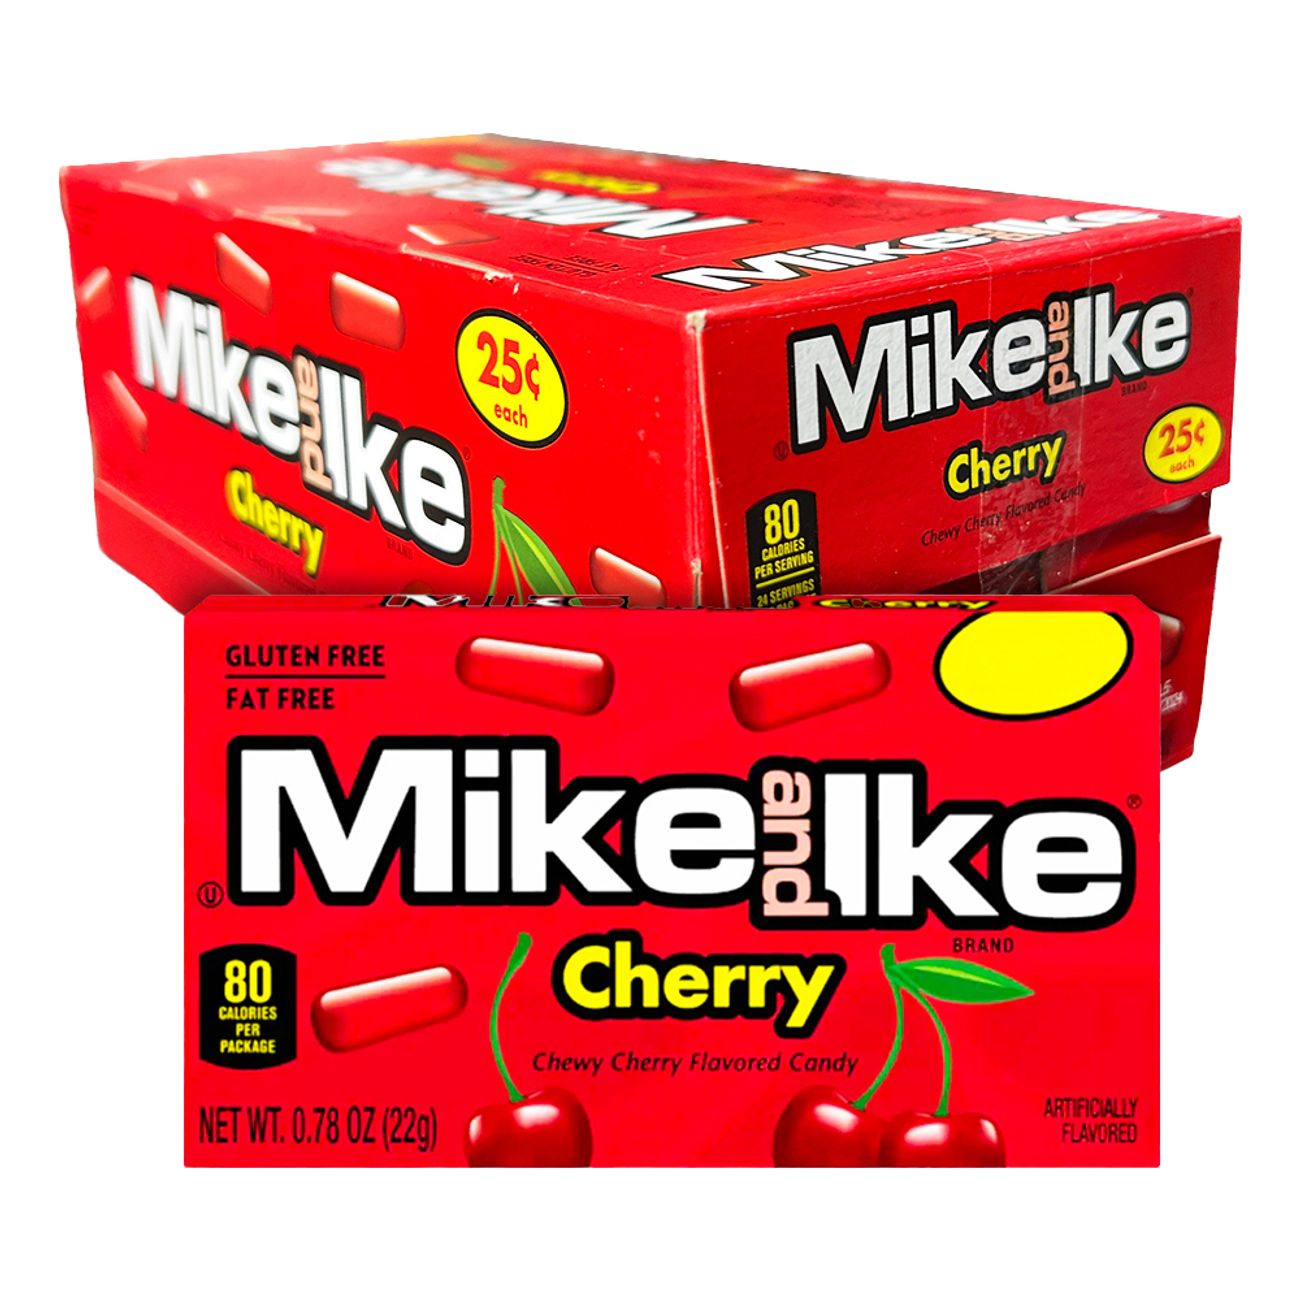 mike-and-ike-cherry-storpack-99929-2